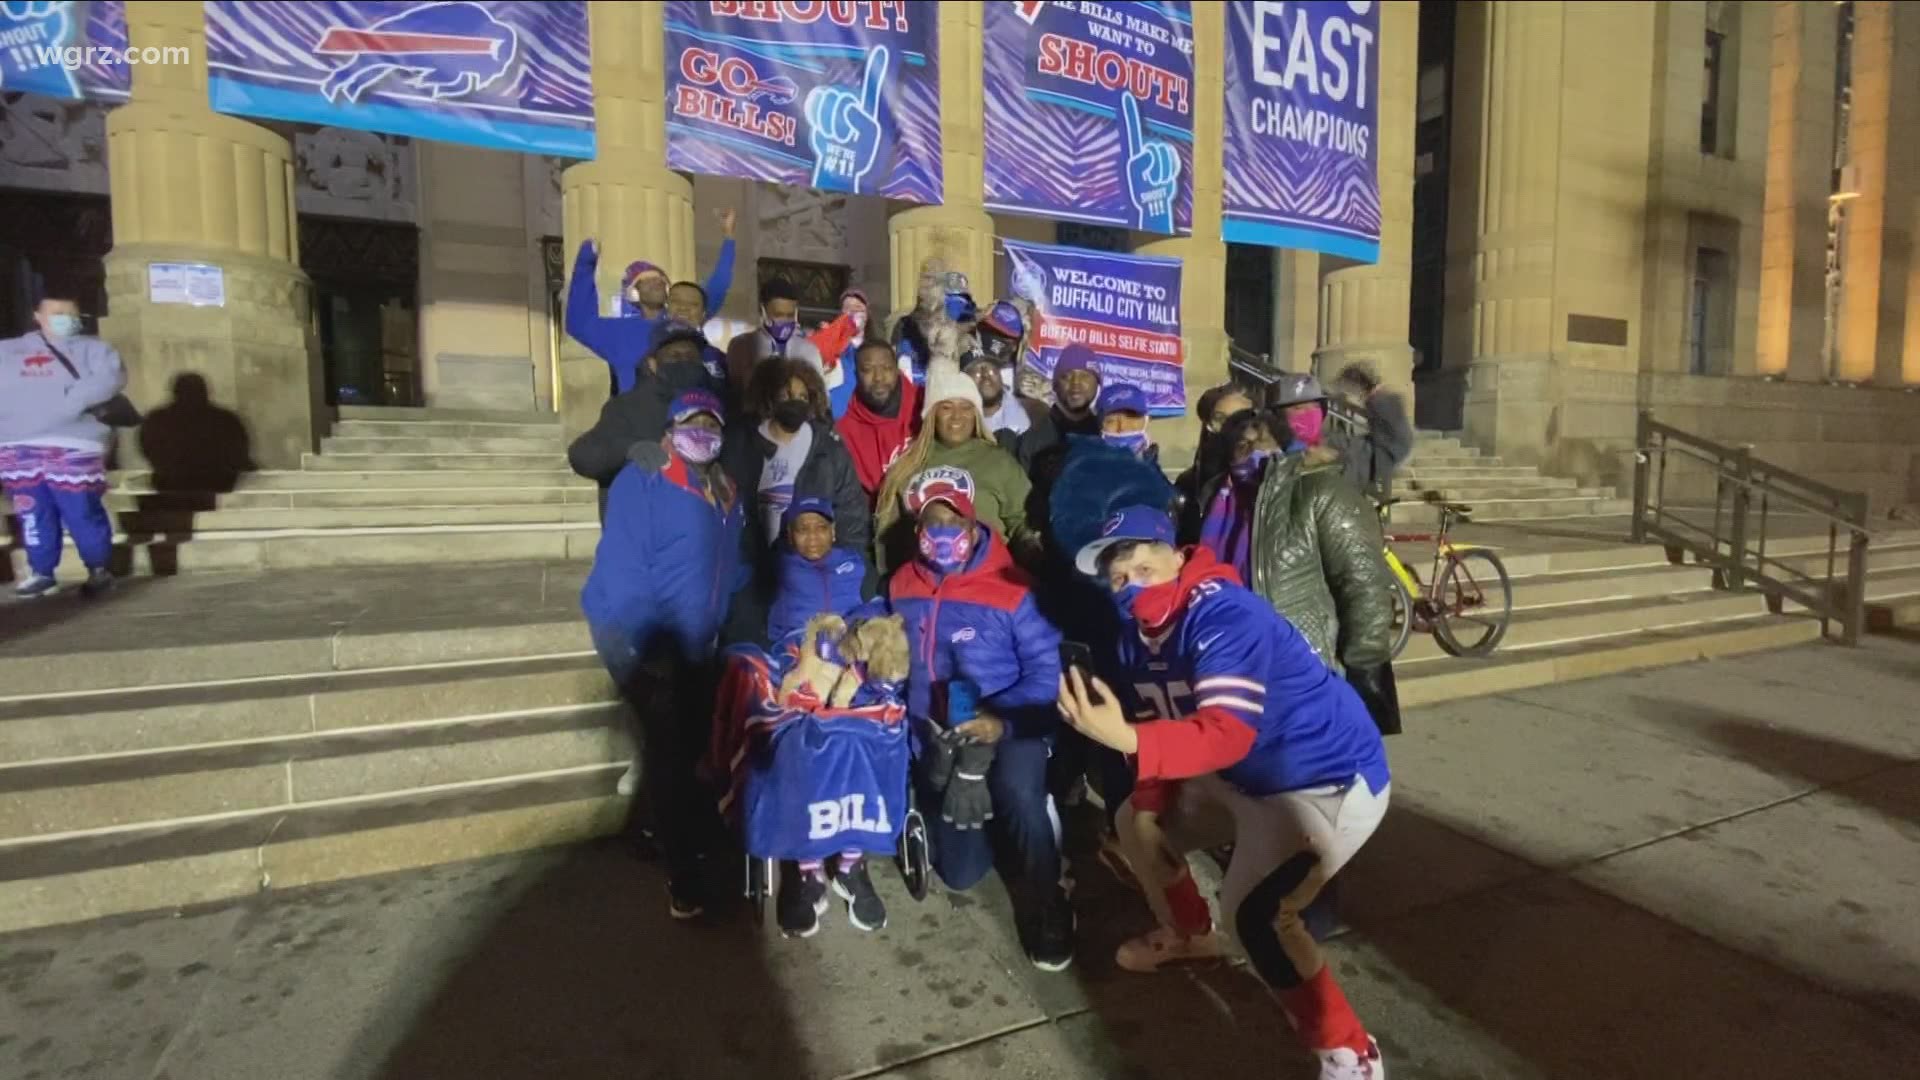 Fans celebrated all over Western New York tonight, whether it was in Orchard Park, at home, or in the City of Buffalo.